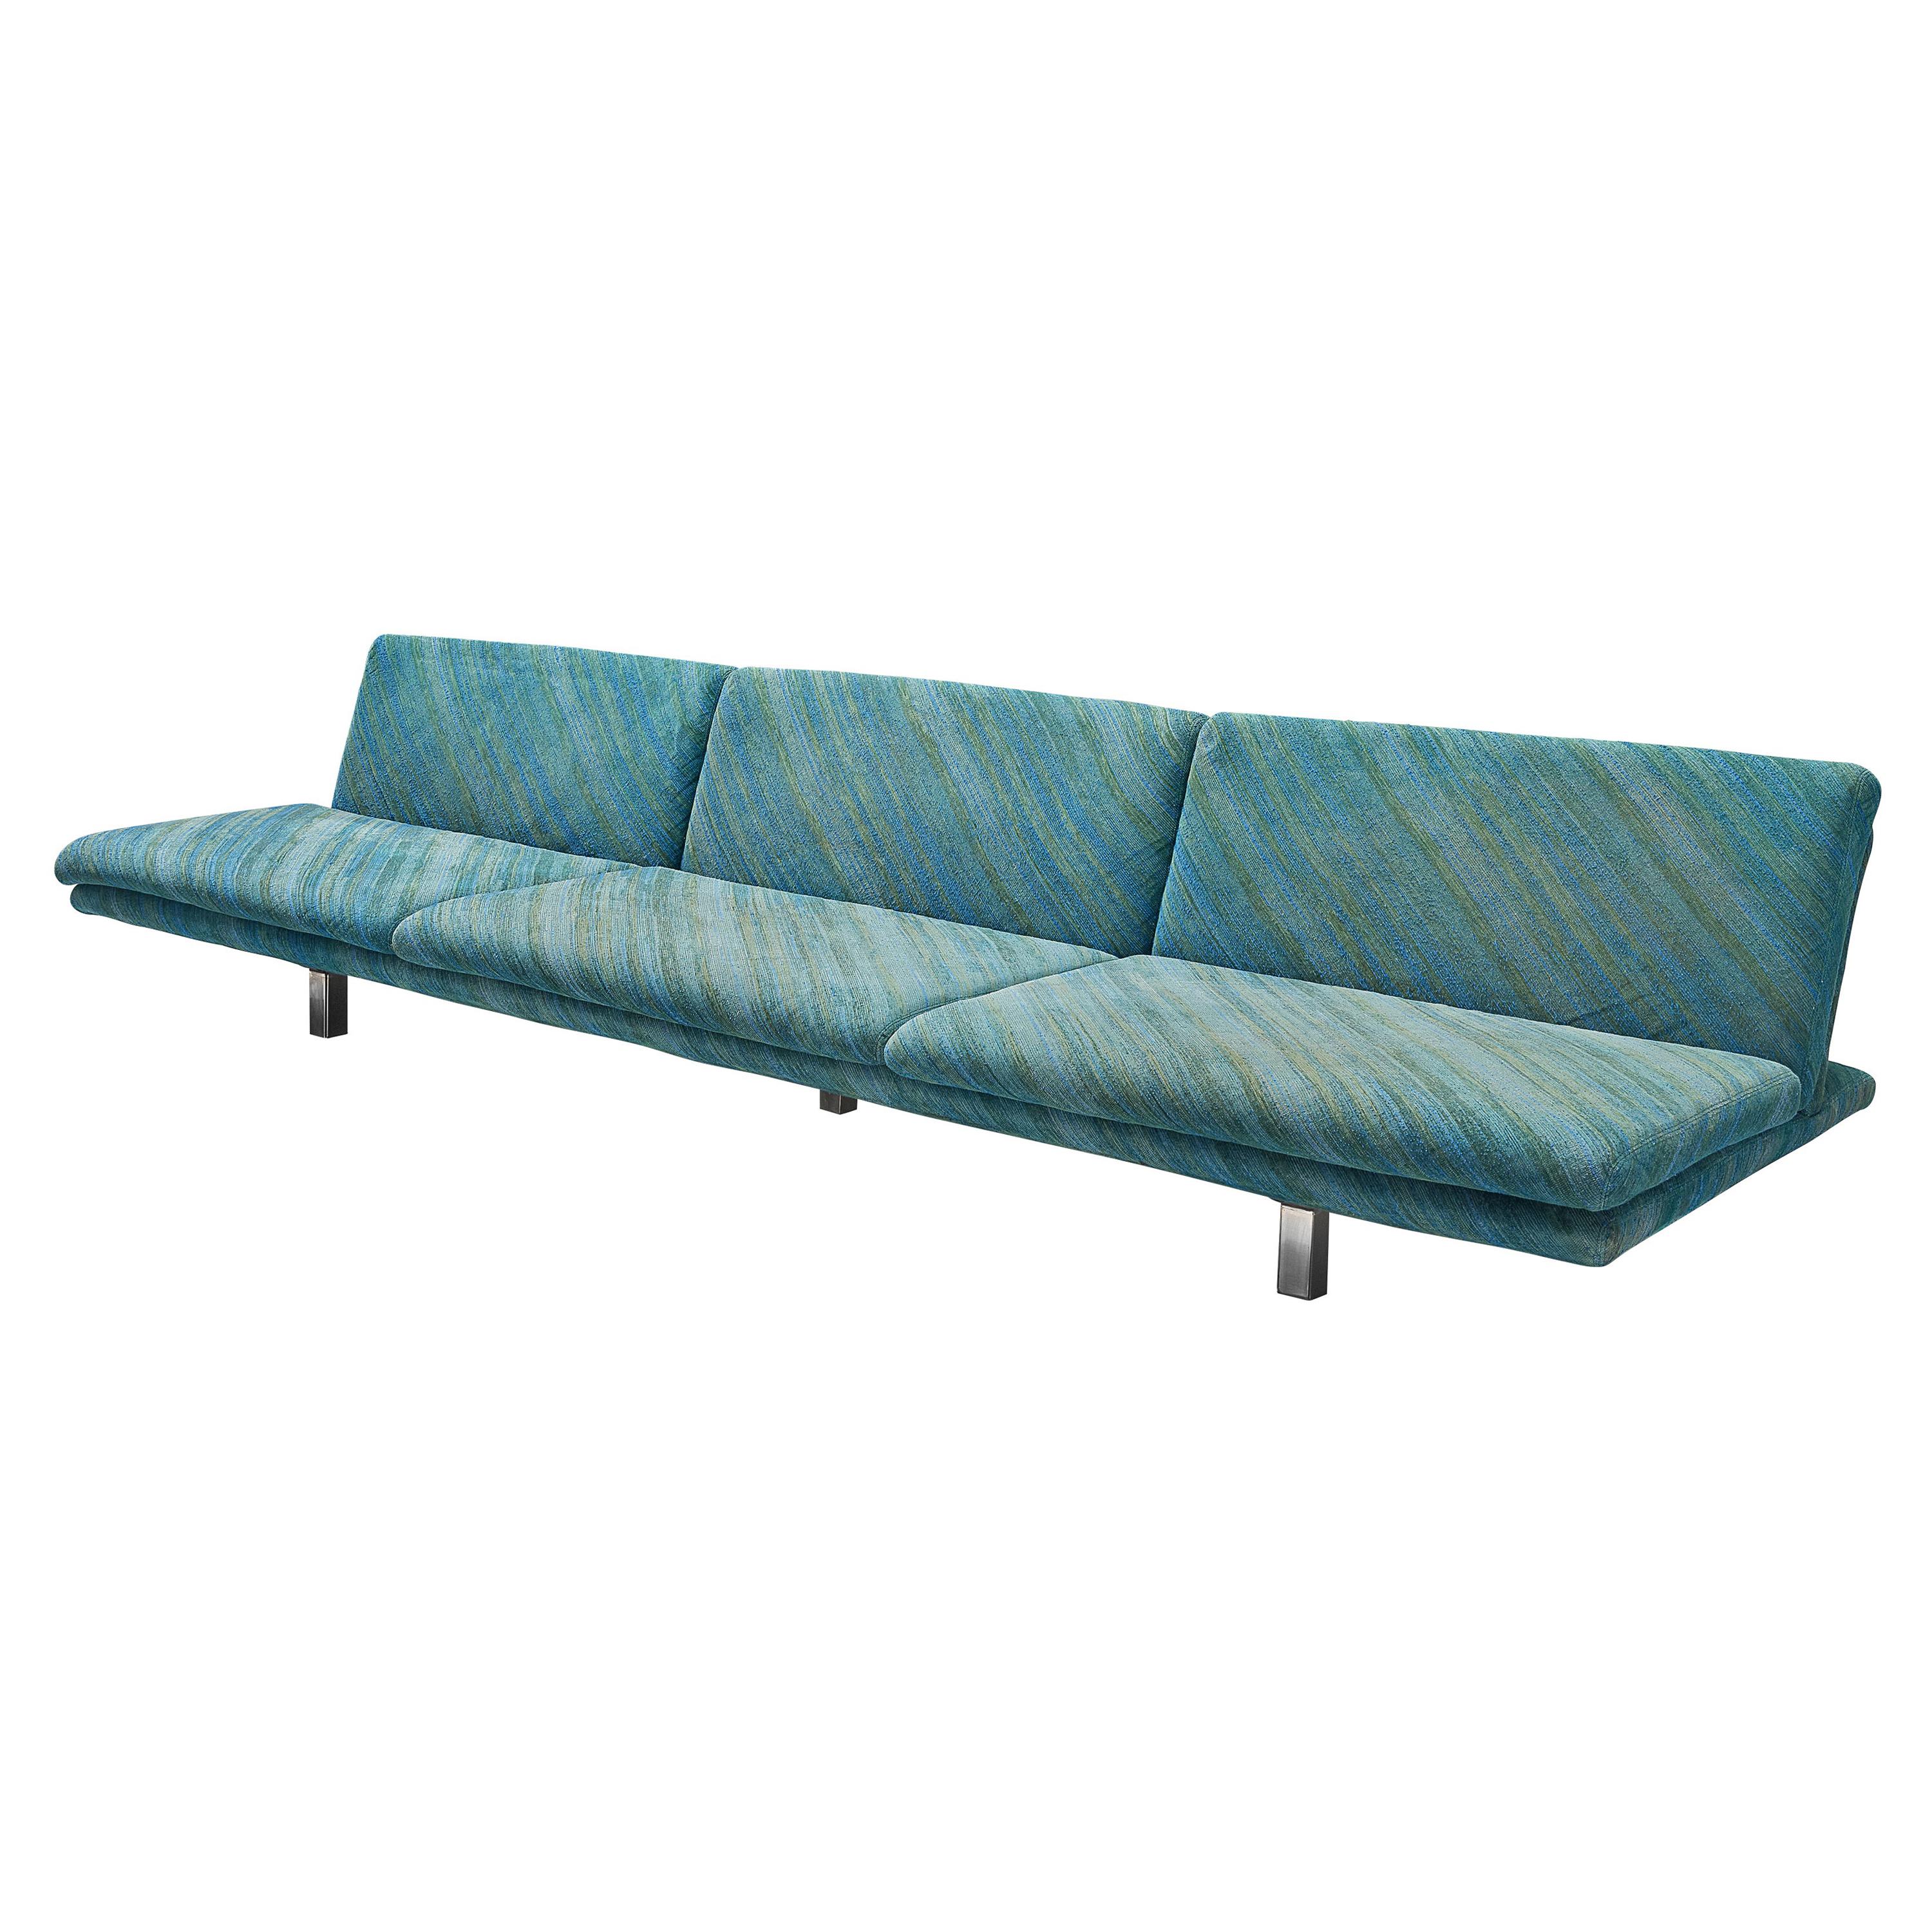 Saporiti Large Sofa in Green-Blue Patterned Upholstery For Sale